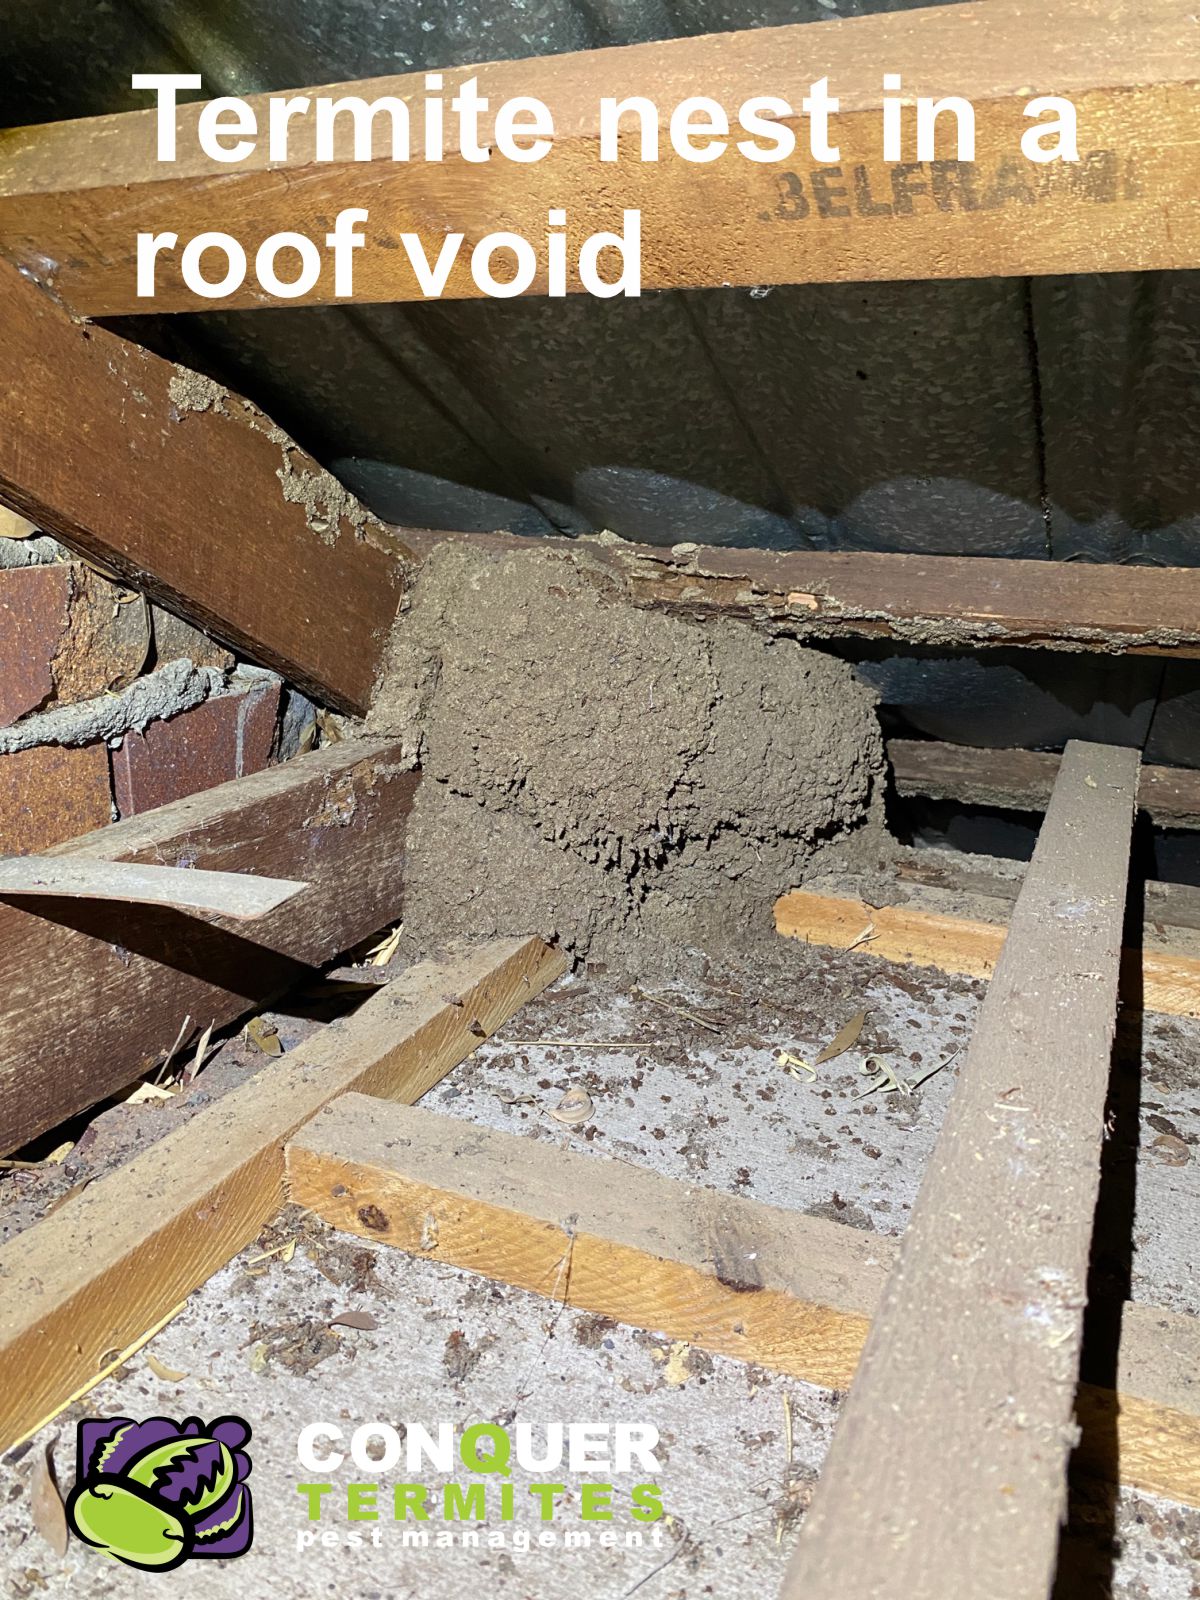 Termite nest found up in a roof